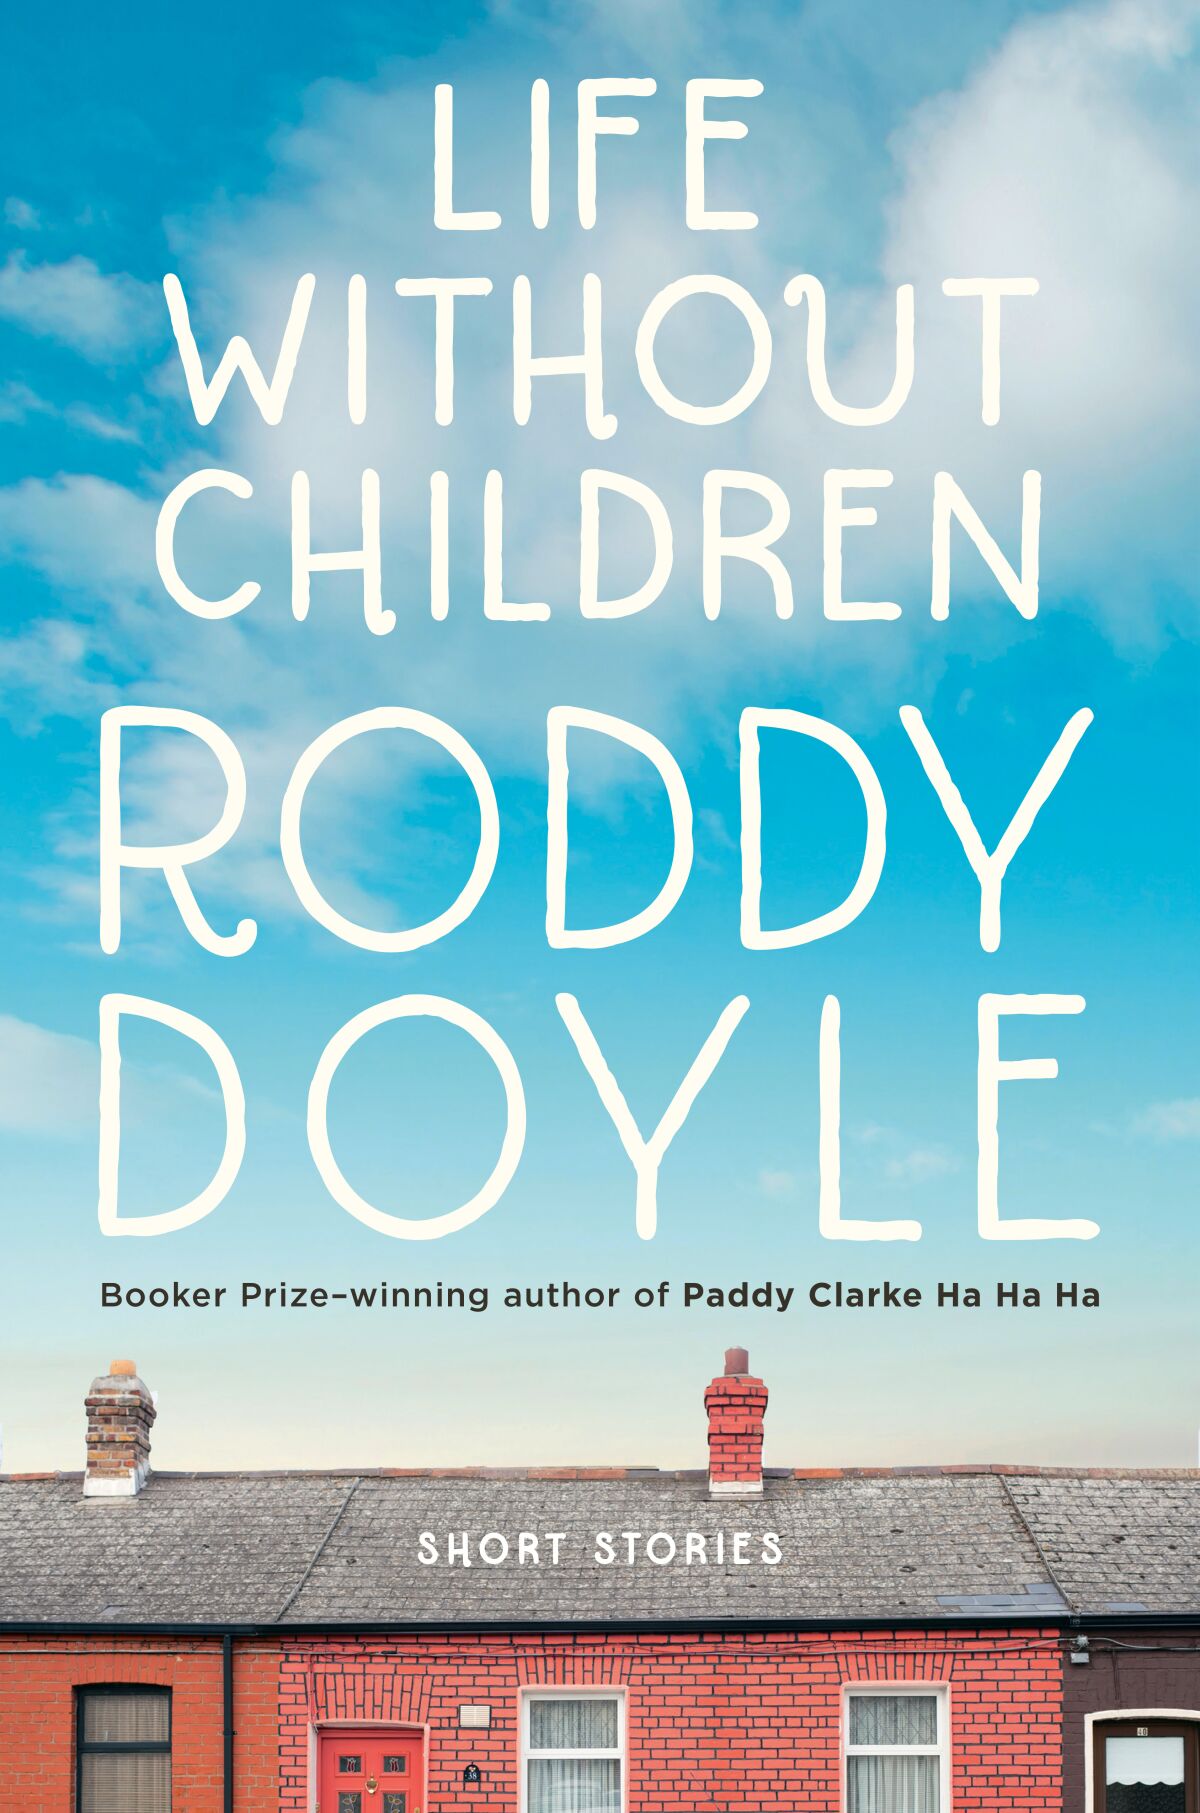 "Life Without Children," by Roddy Doyle